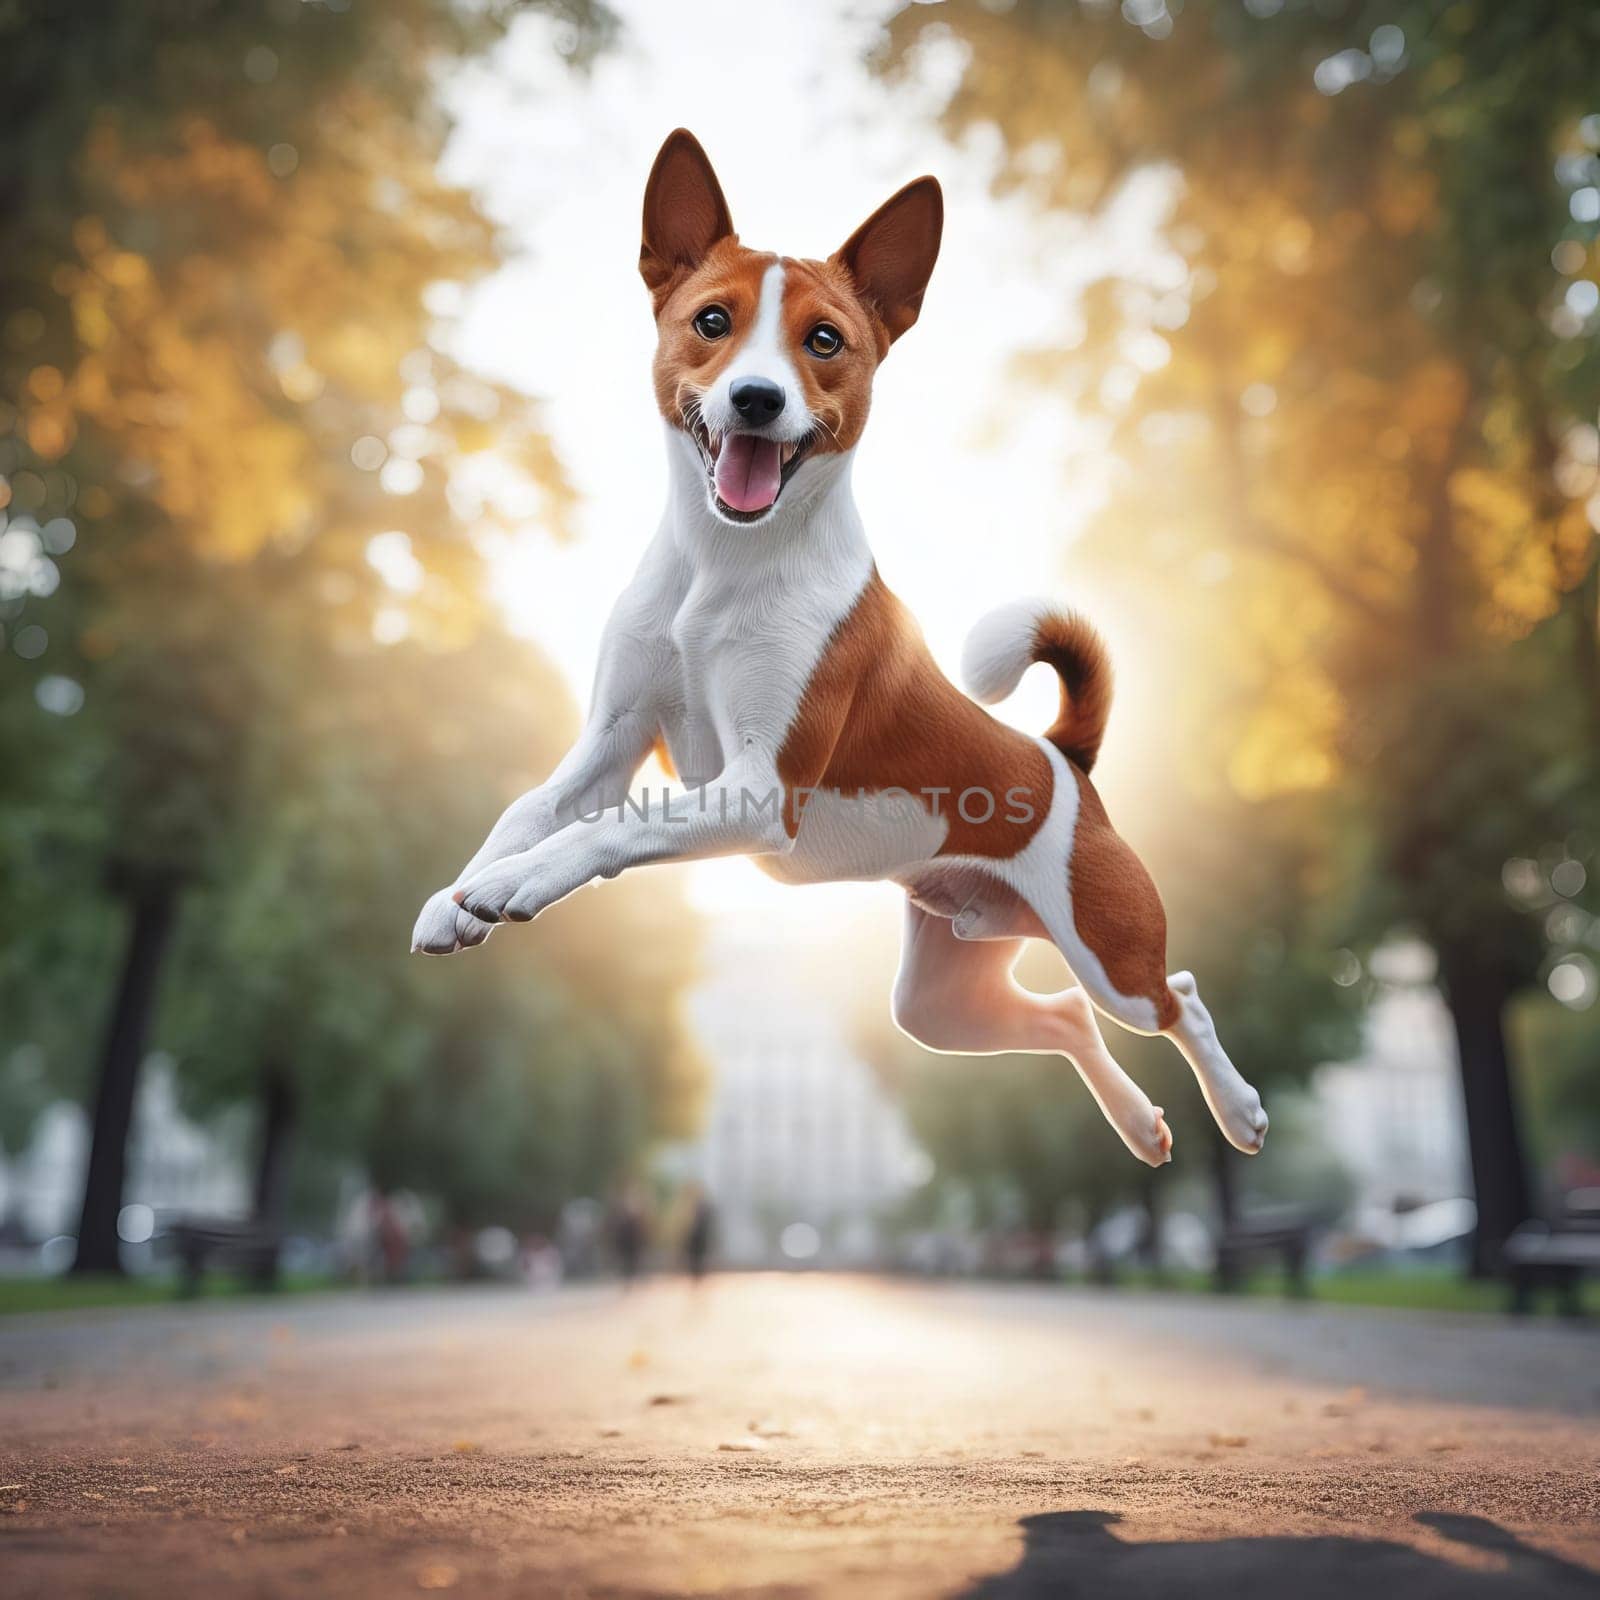 A lively dog leaps in mid-air in a park, with a blurred cityscape in the background, embodying pure joy and freedom. by sfinks